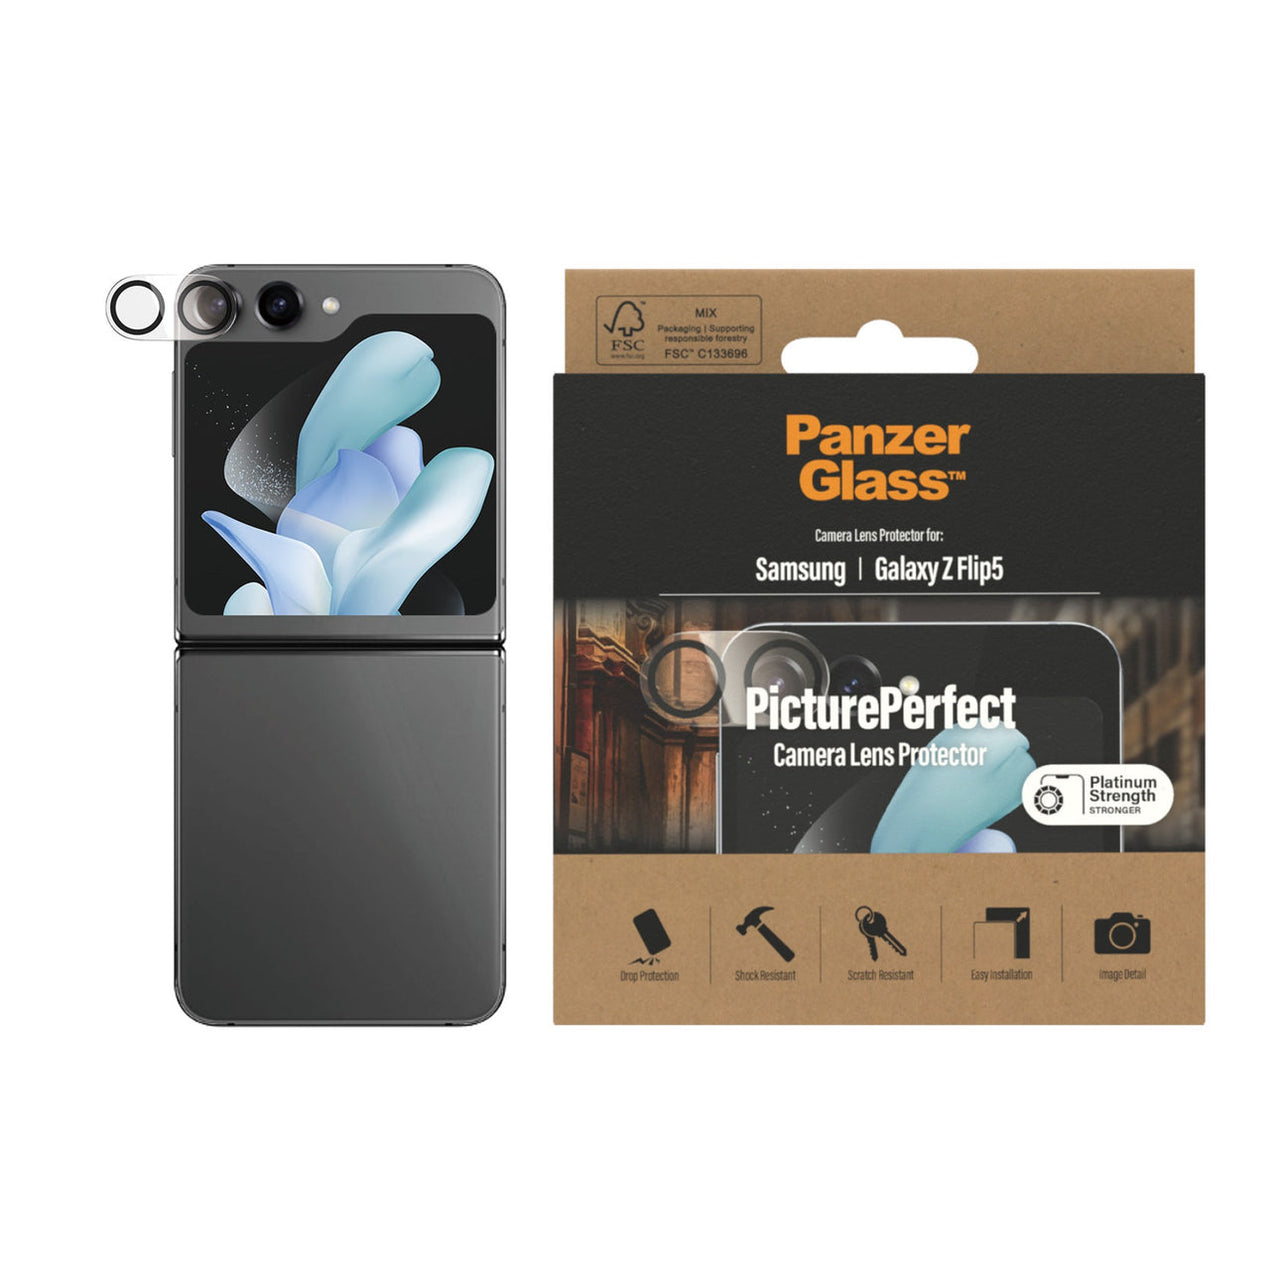 PanzerGlass PicturePerfect Camera Lens Protection for Samsung Galaxy Z Flip5